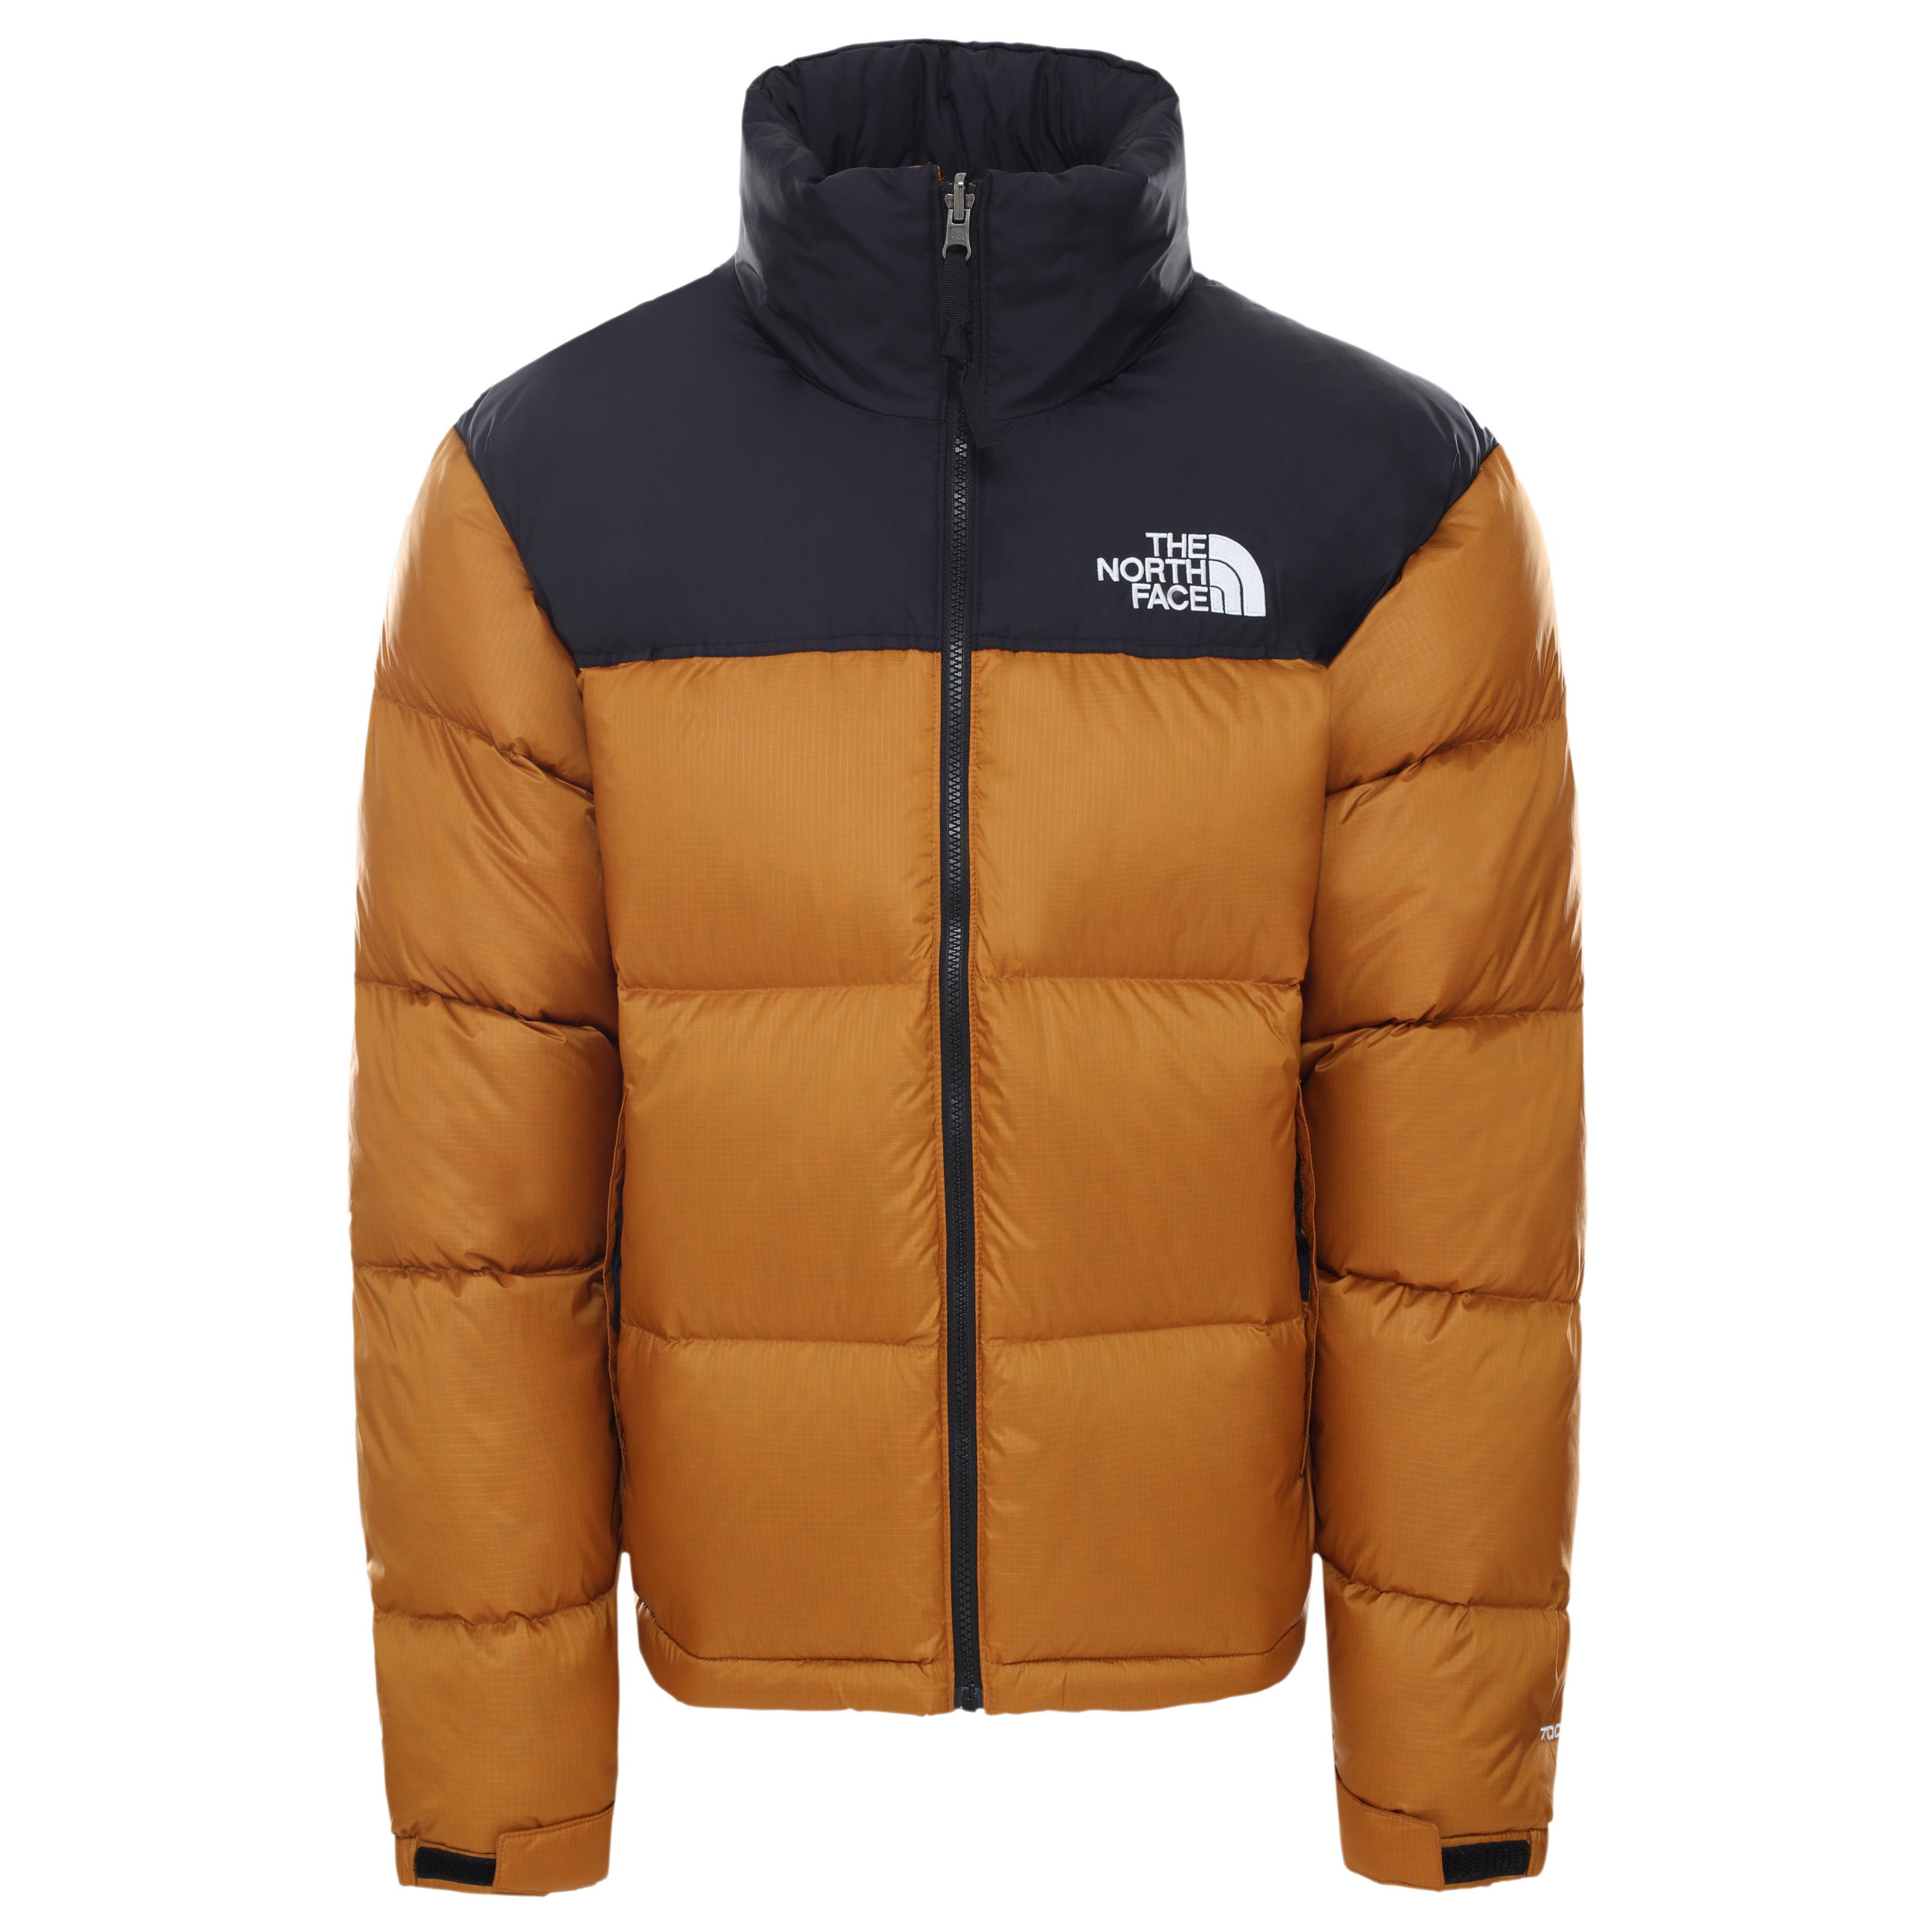 The North Face 1996 Retro Nuptse Jacket Timber Tan in Brown for Men - Lyst